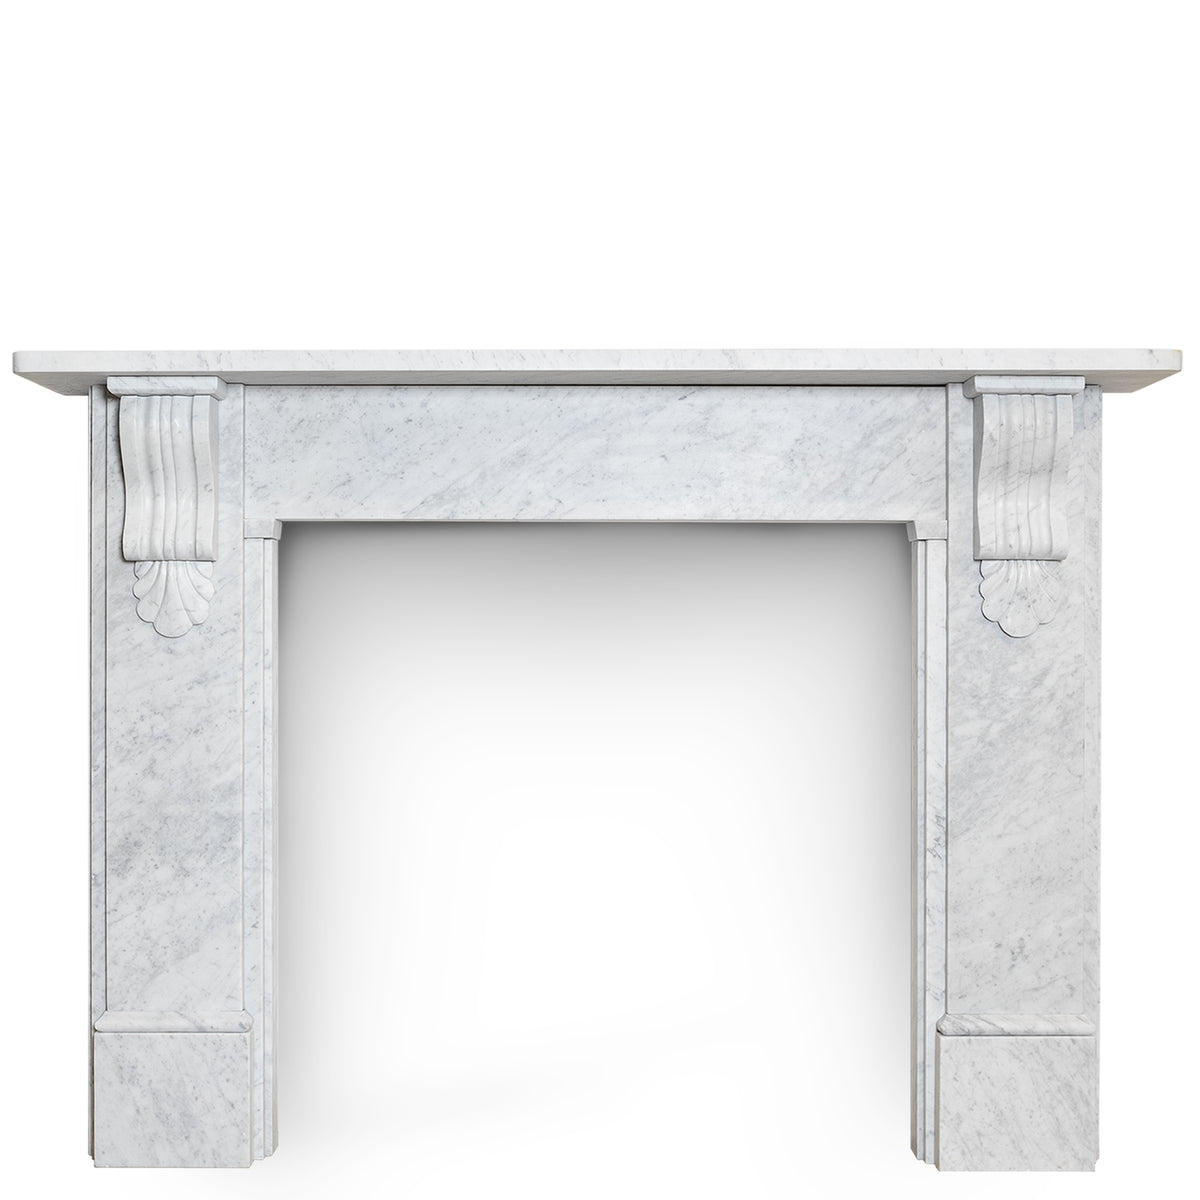 Bespoke Victorian Style Carrara Marble Fireplace Surround with Corbels | The Architectural Forum